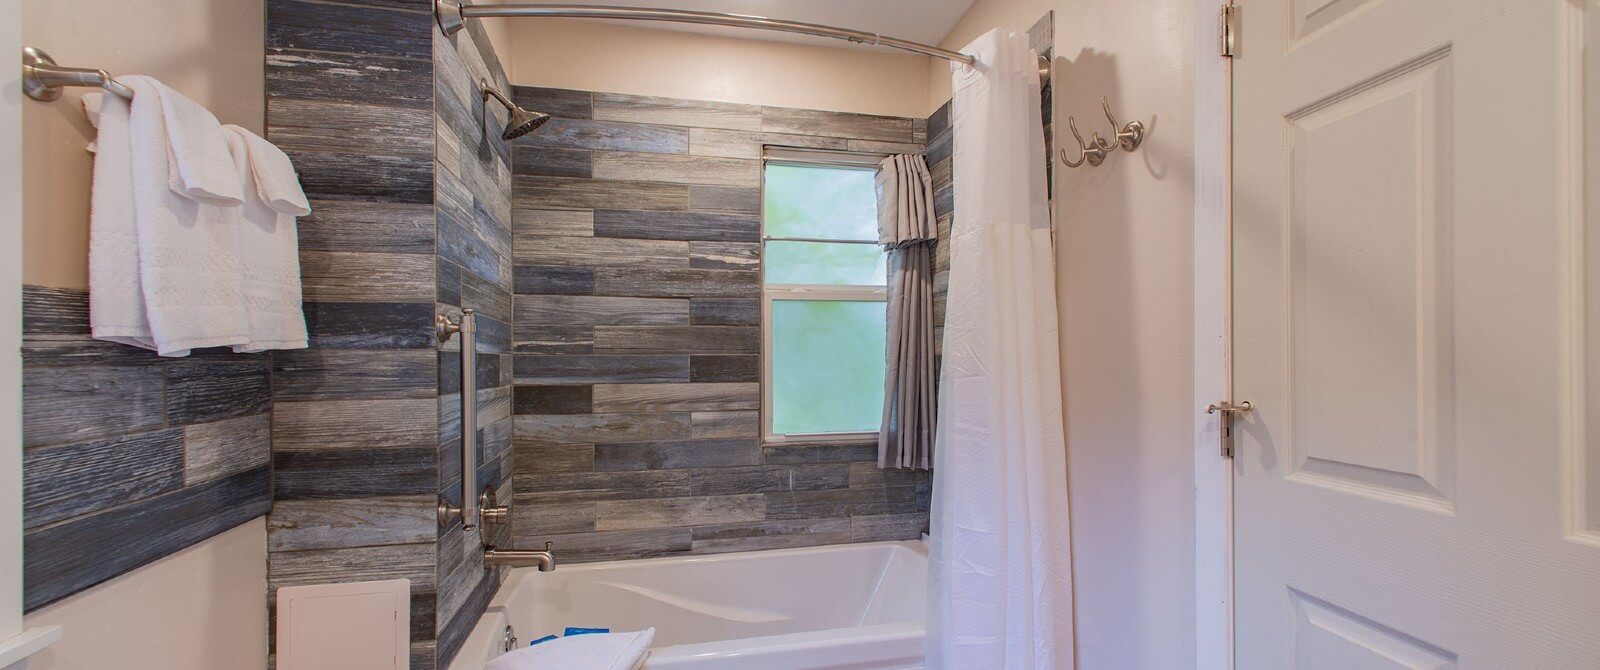 Bathroom with tiled stand up shower, white shower curtain and small window